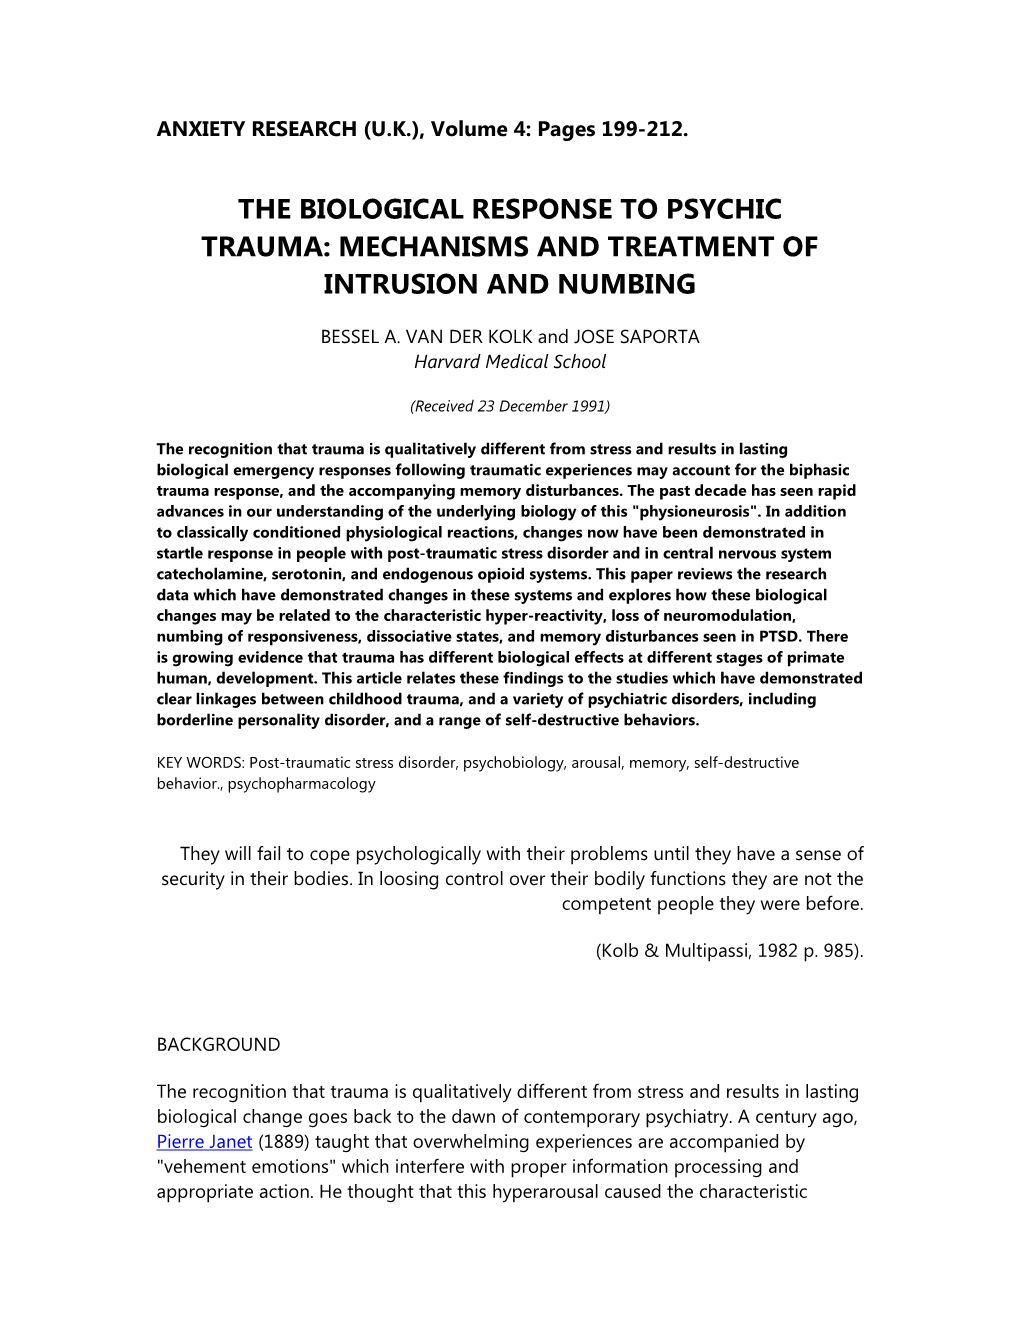 The Biological Response to Psychic Trauma: Mechanisms and Treatment of Intrusion and Numbing